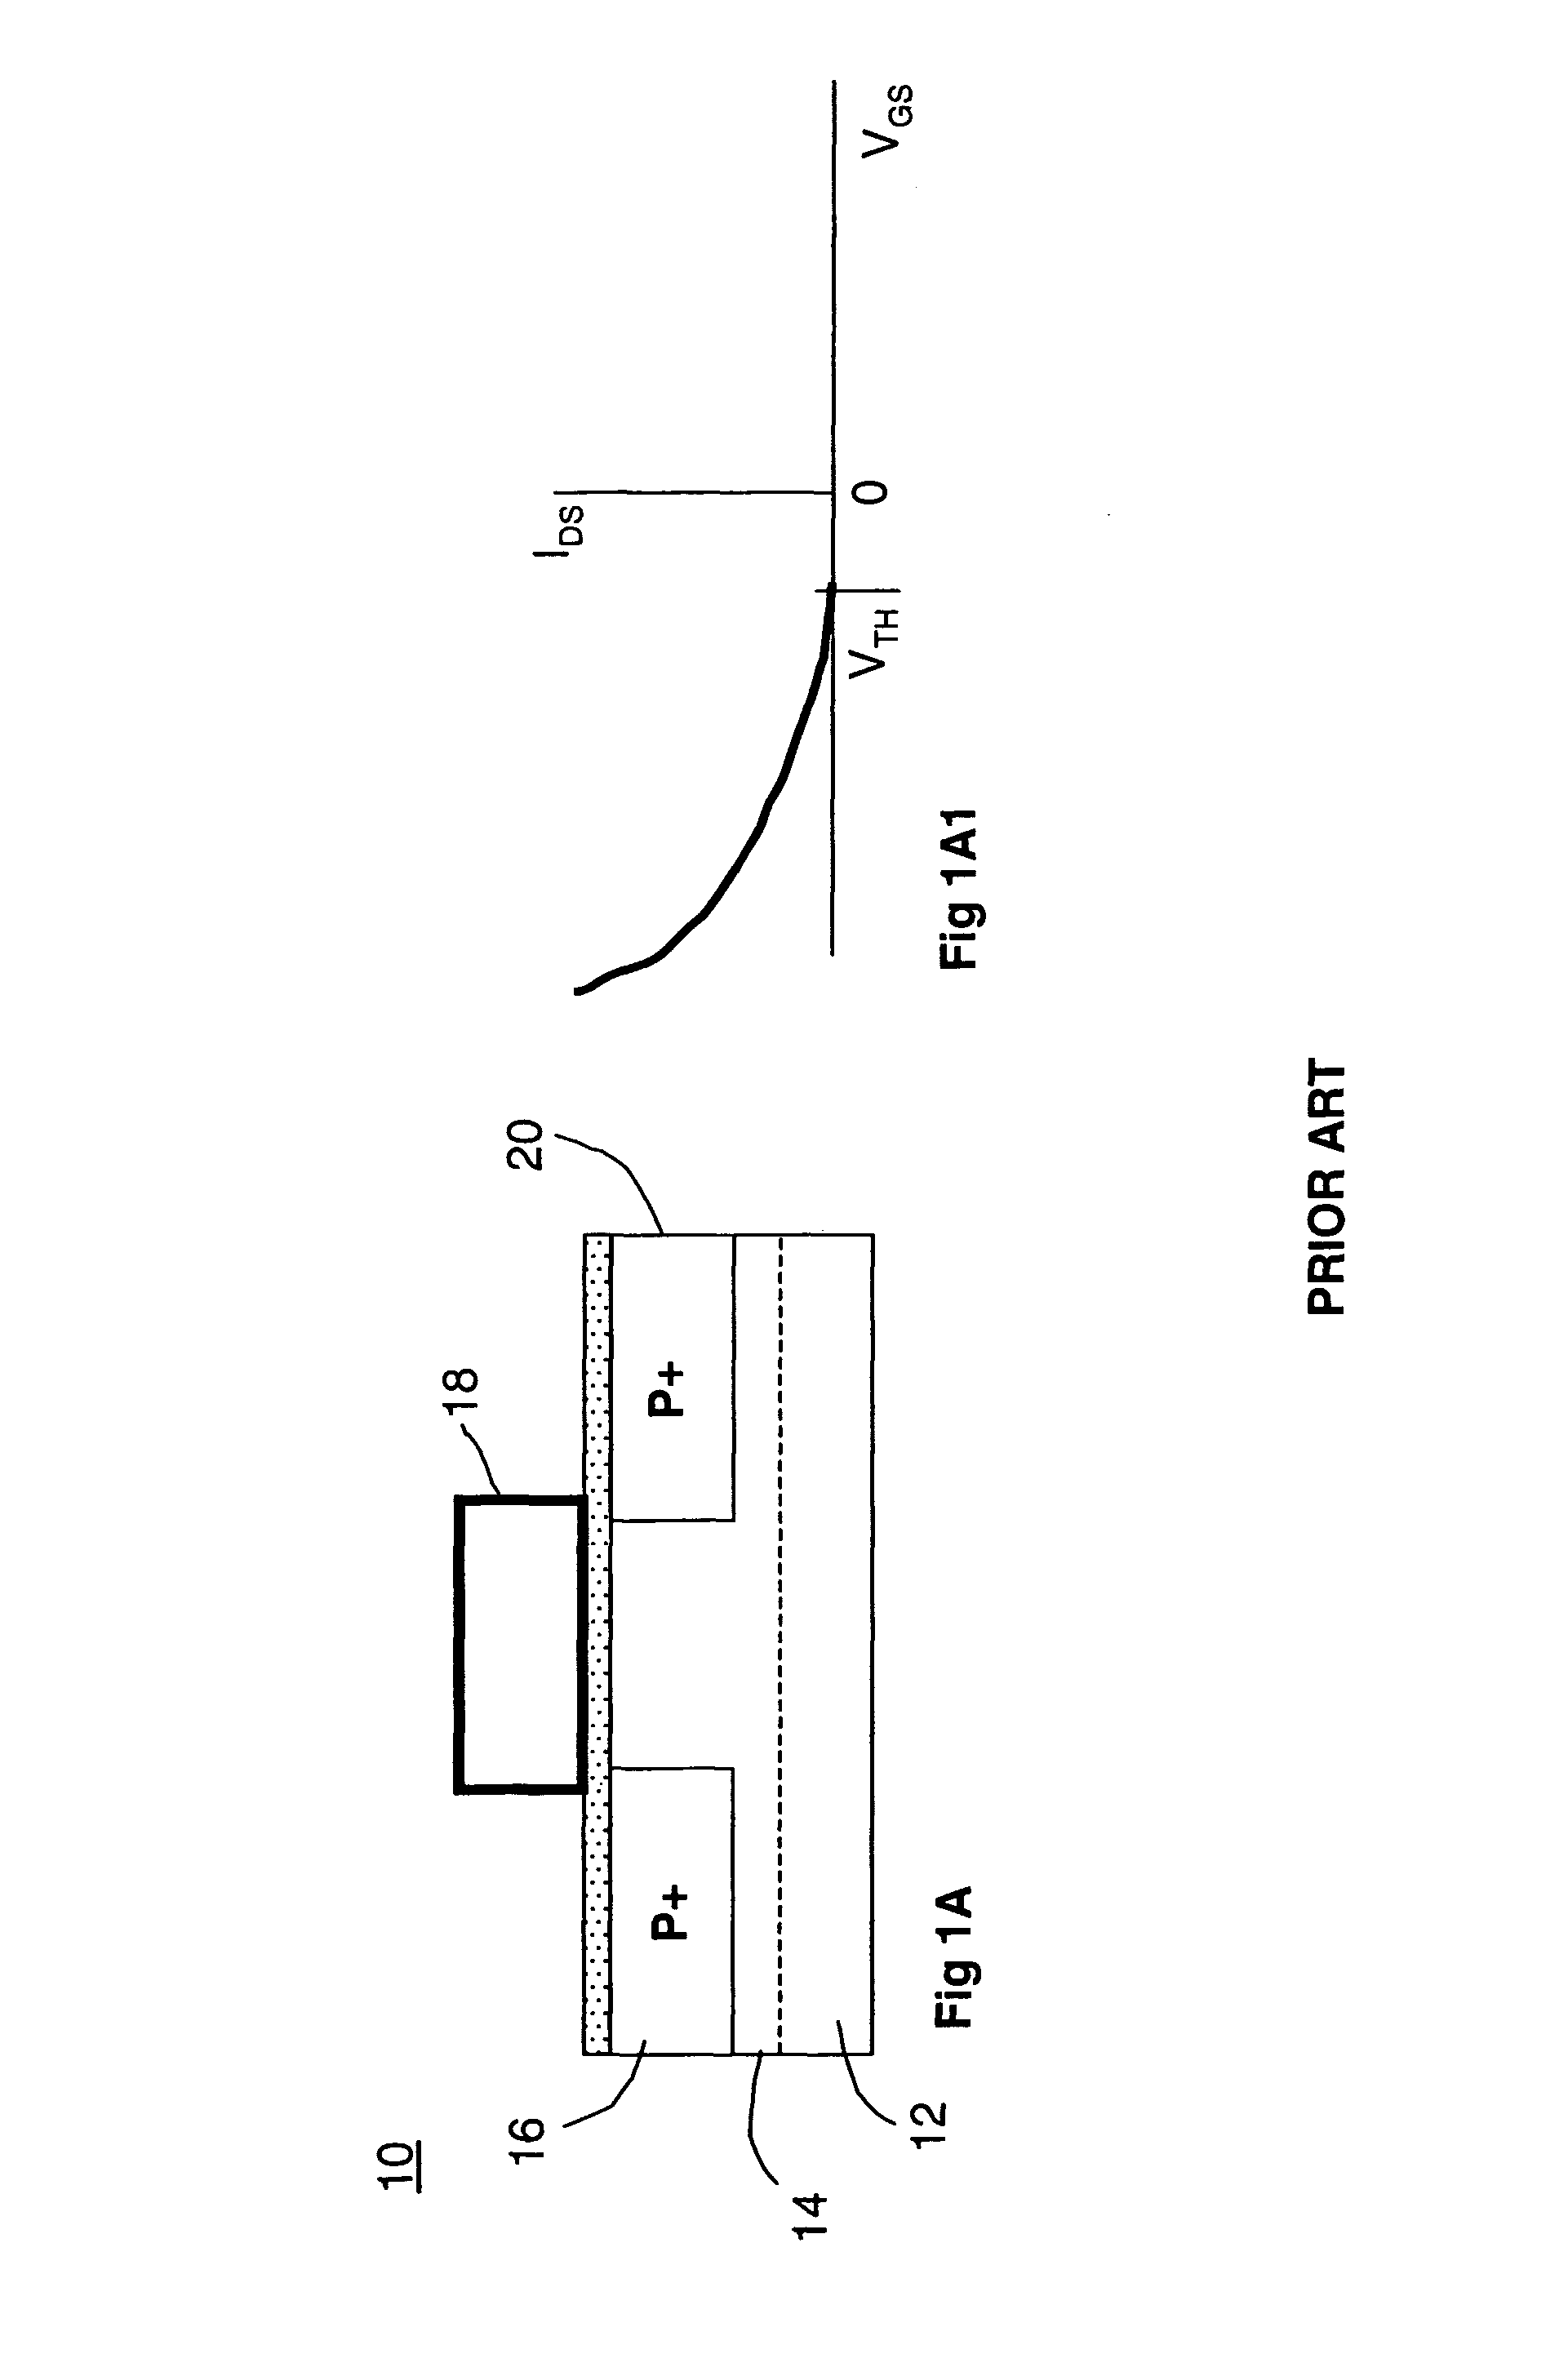 Field effect device having a channel of nanofabric and methods of making same